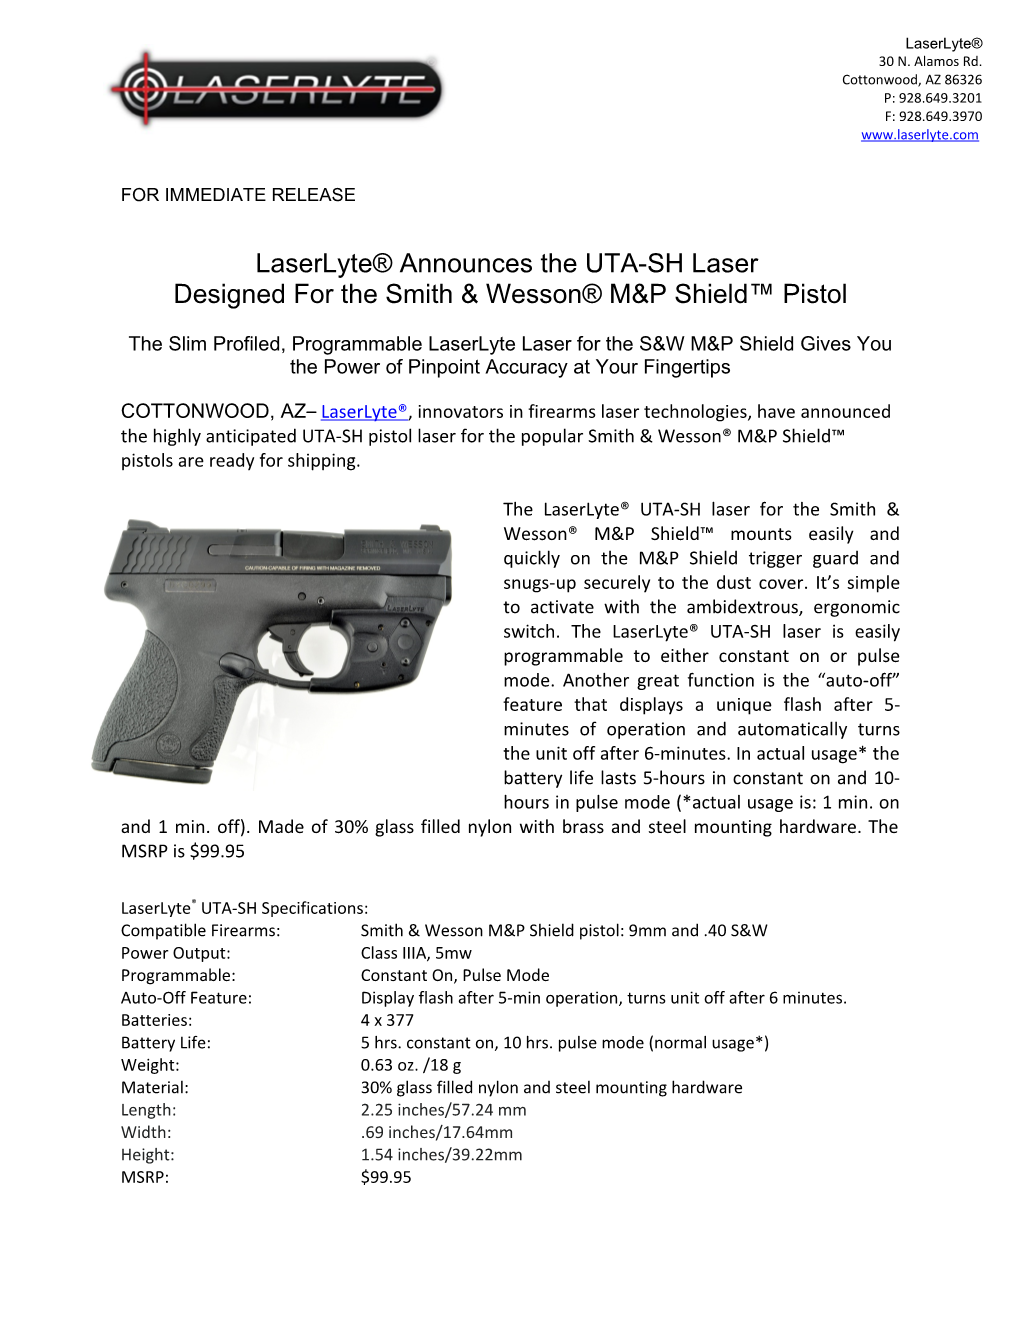 Designed for the Smith & Wesson M&P Shield Pistol